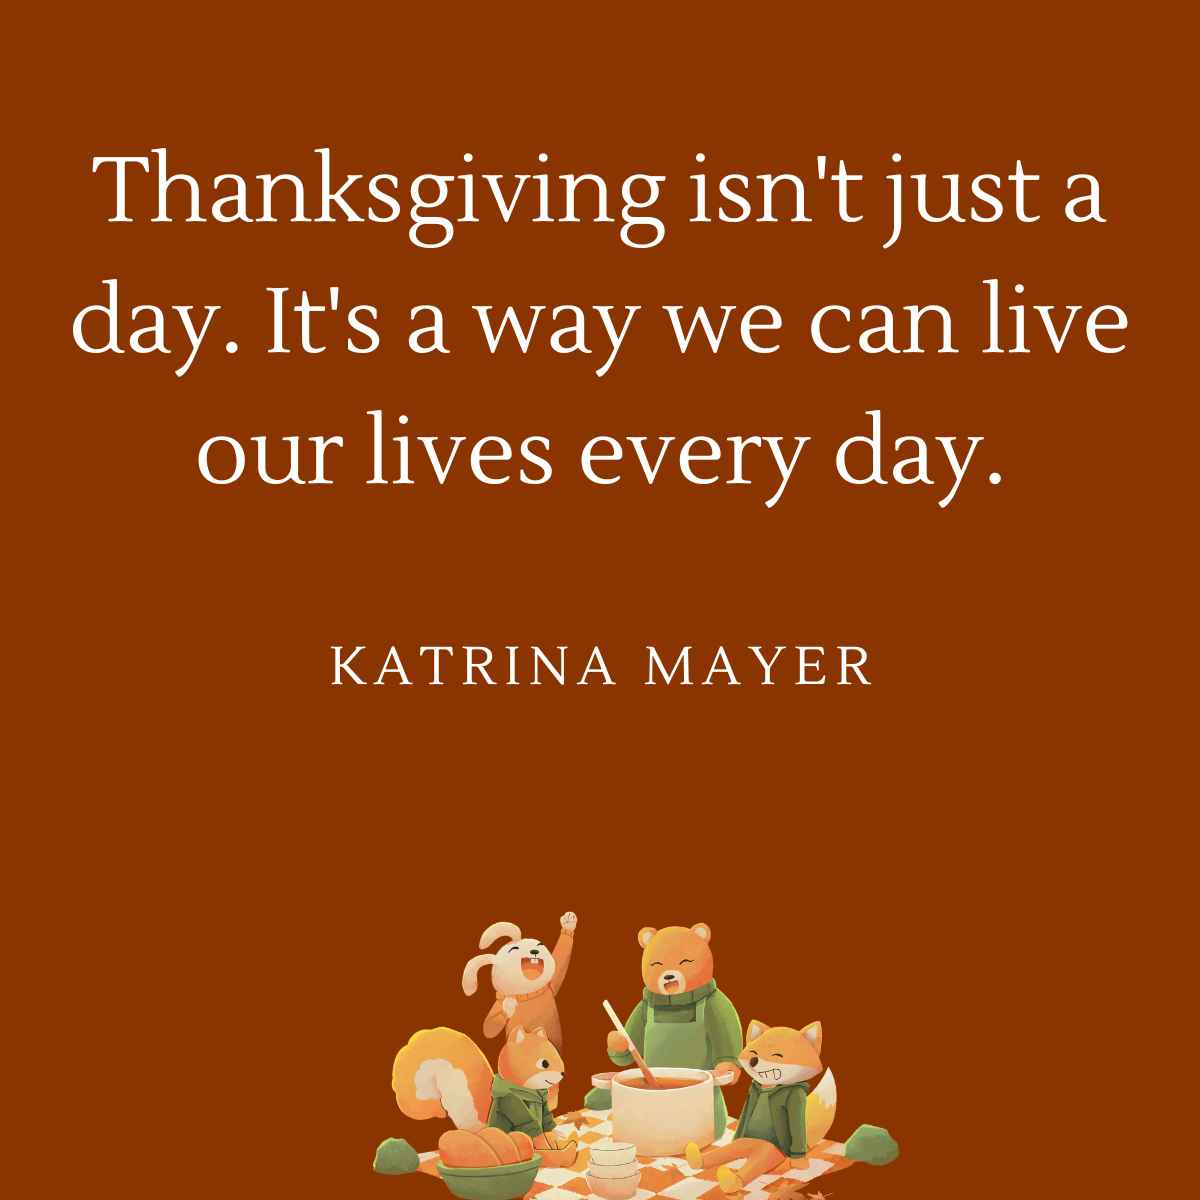 thanksgiving quote by katrina Mayer 